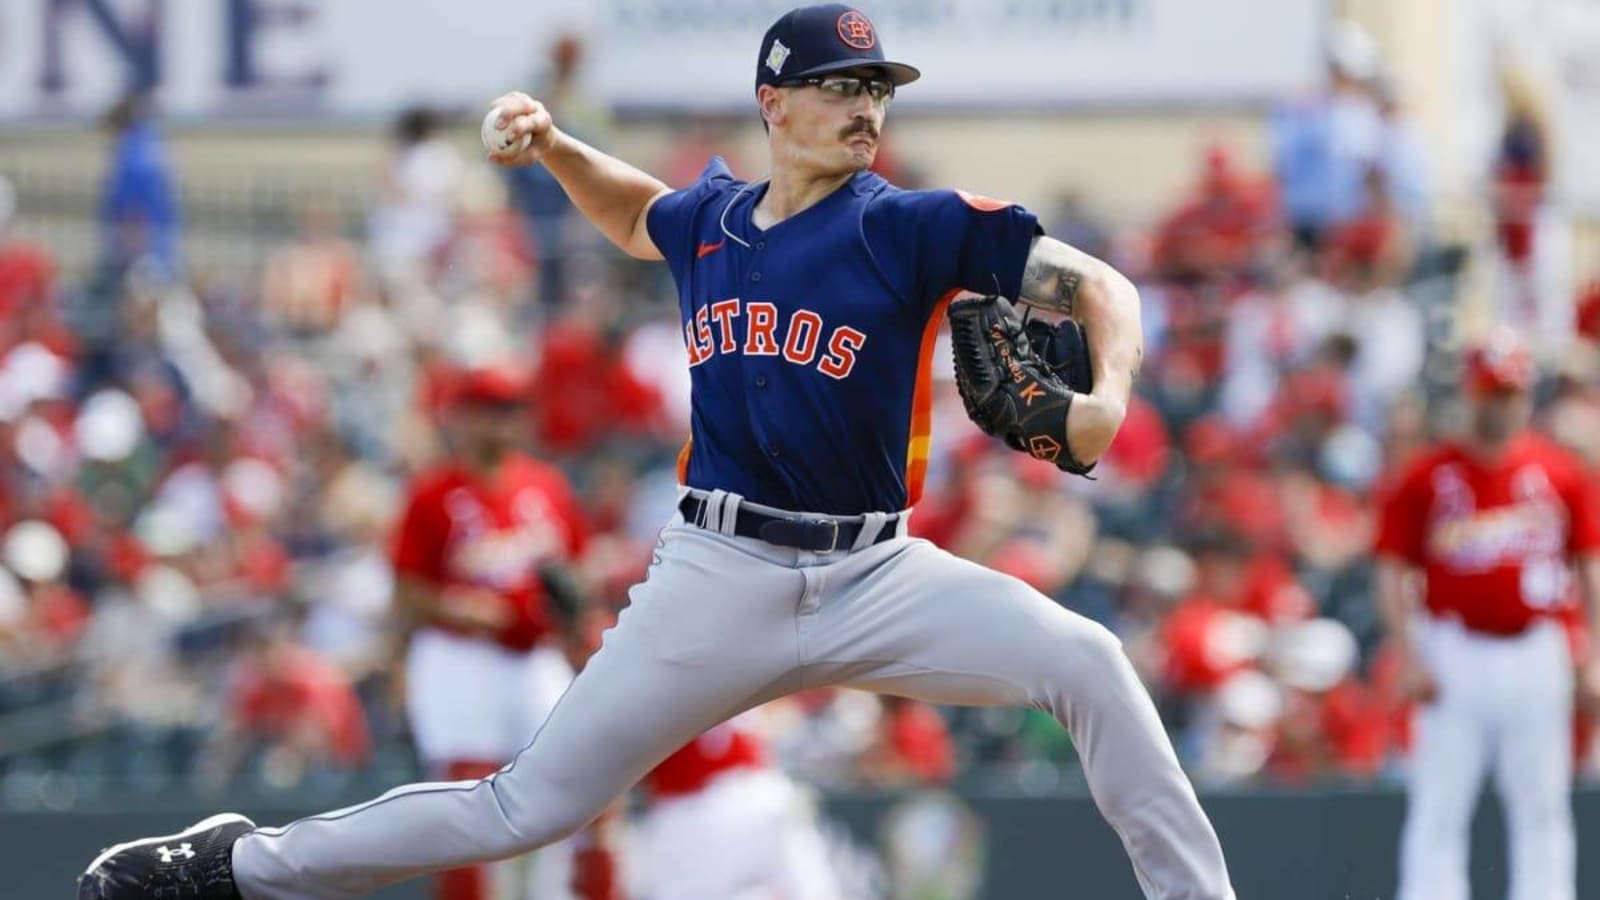 Houston Astros Prospect Impresses, Throws Five No-Hit Innings in Win